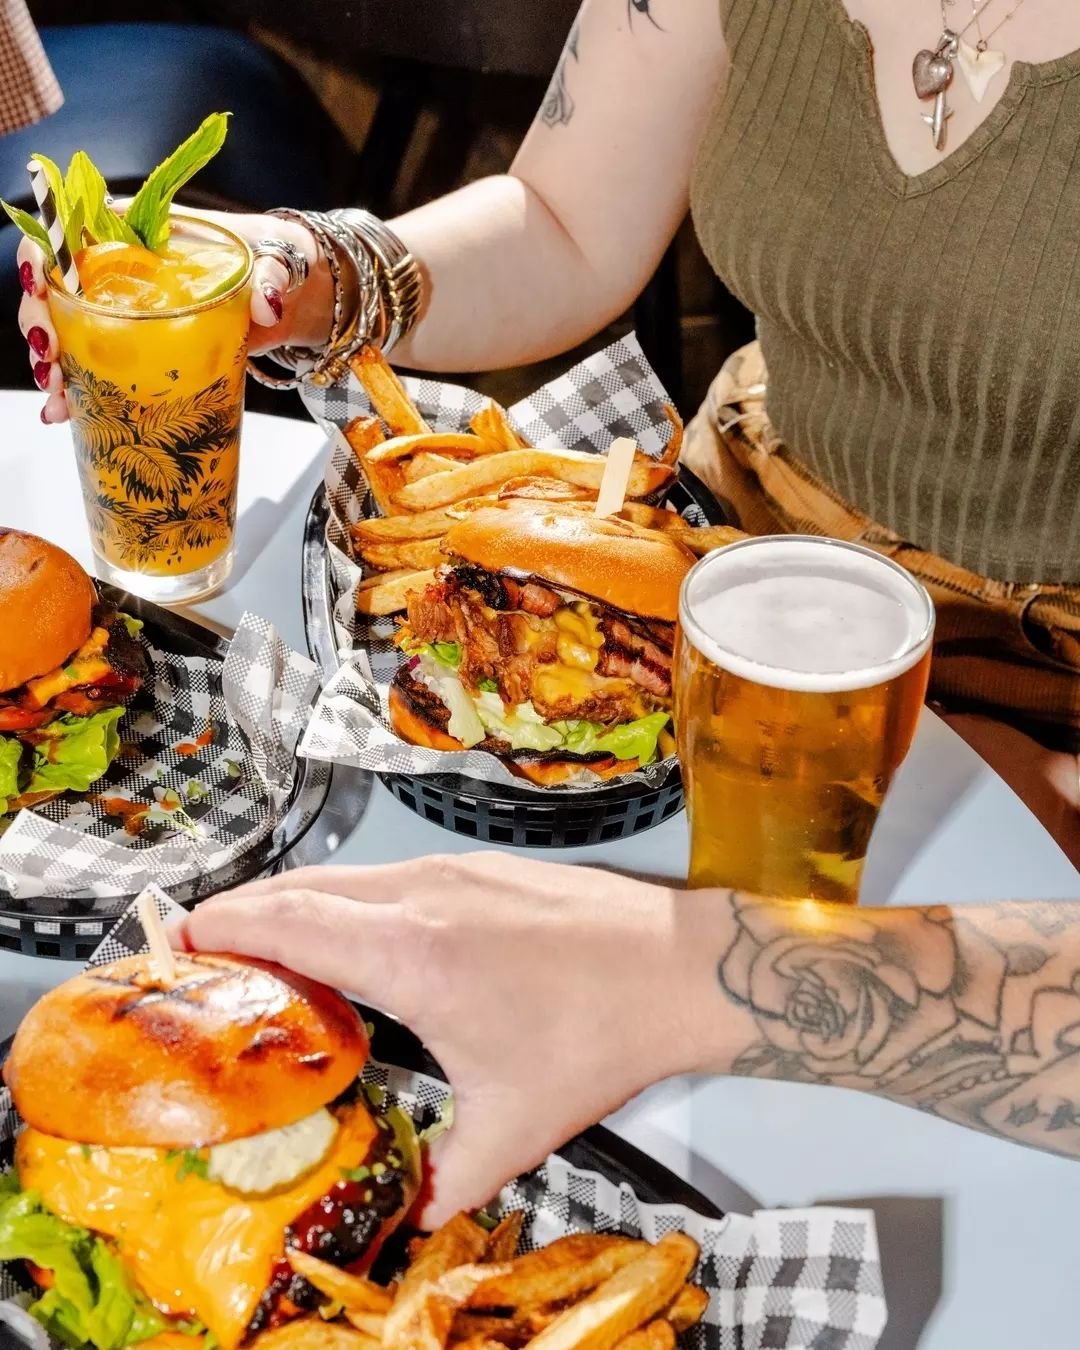 NEON PALMS 🍔🍔 Servin' up cocktails, dreams and (delicious) burgers on William.

Come and get your hands dirty with one of our juicy burgers with a Latin-American flare.